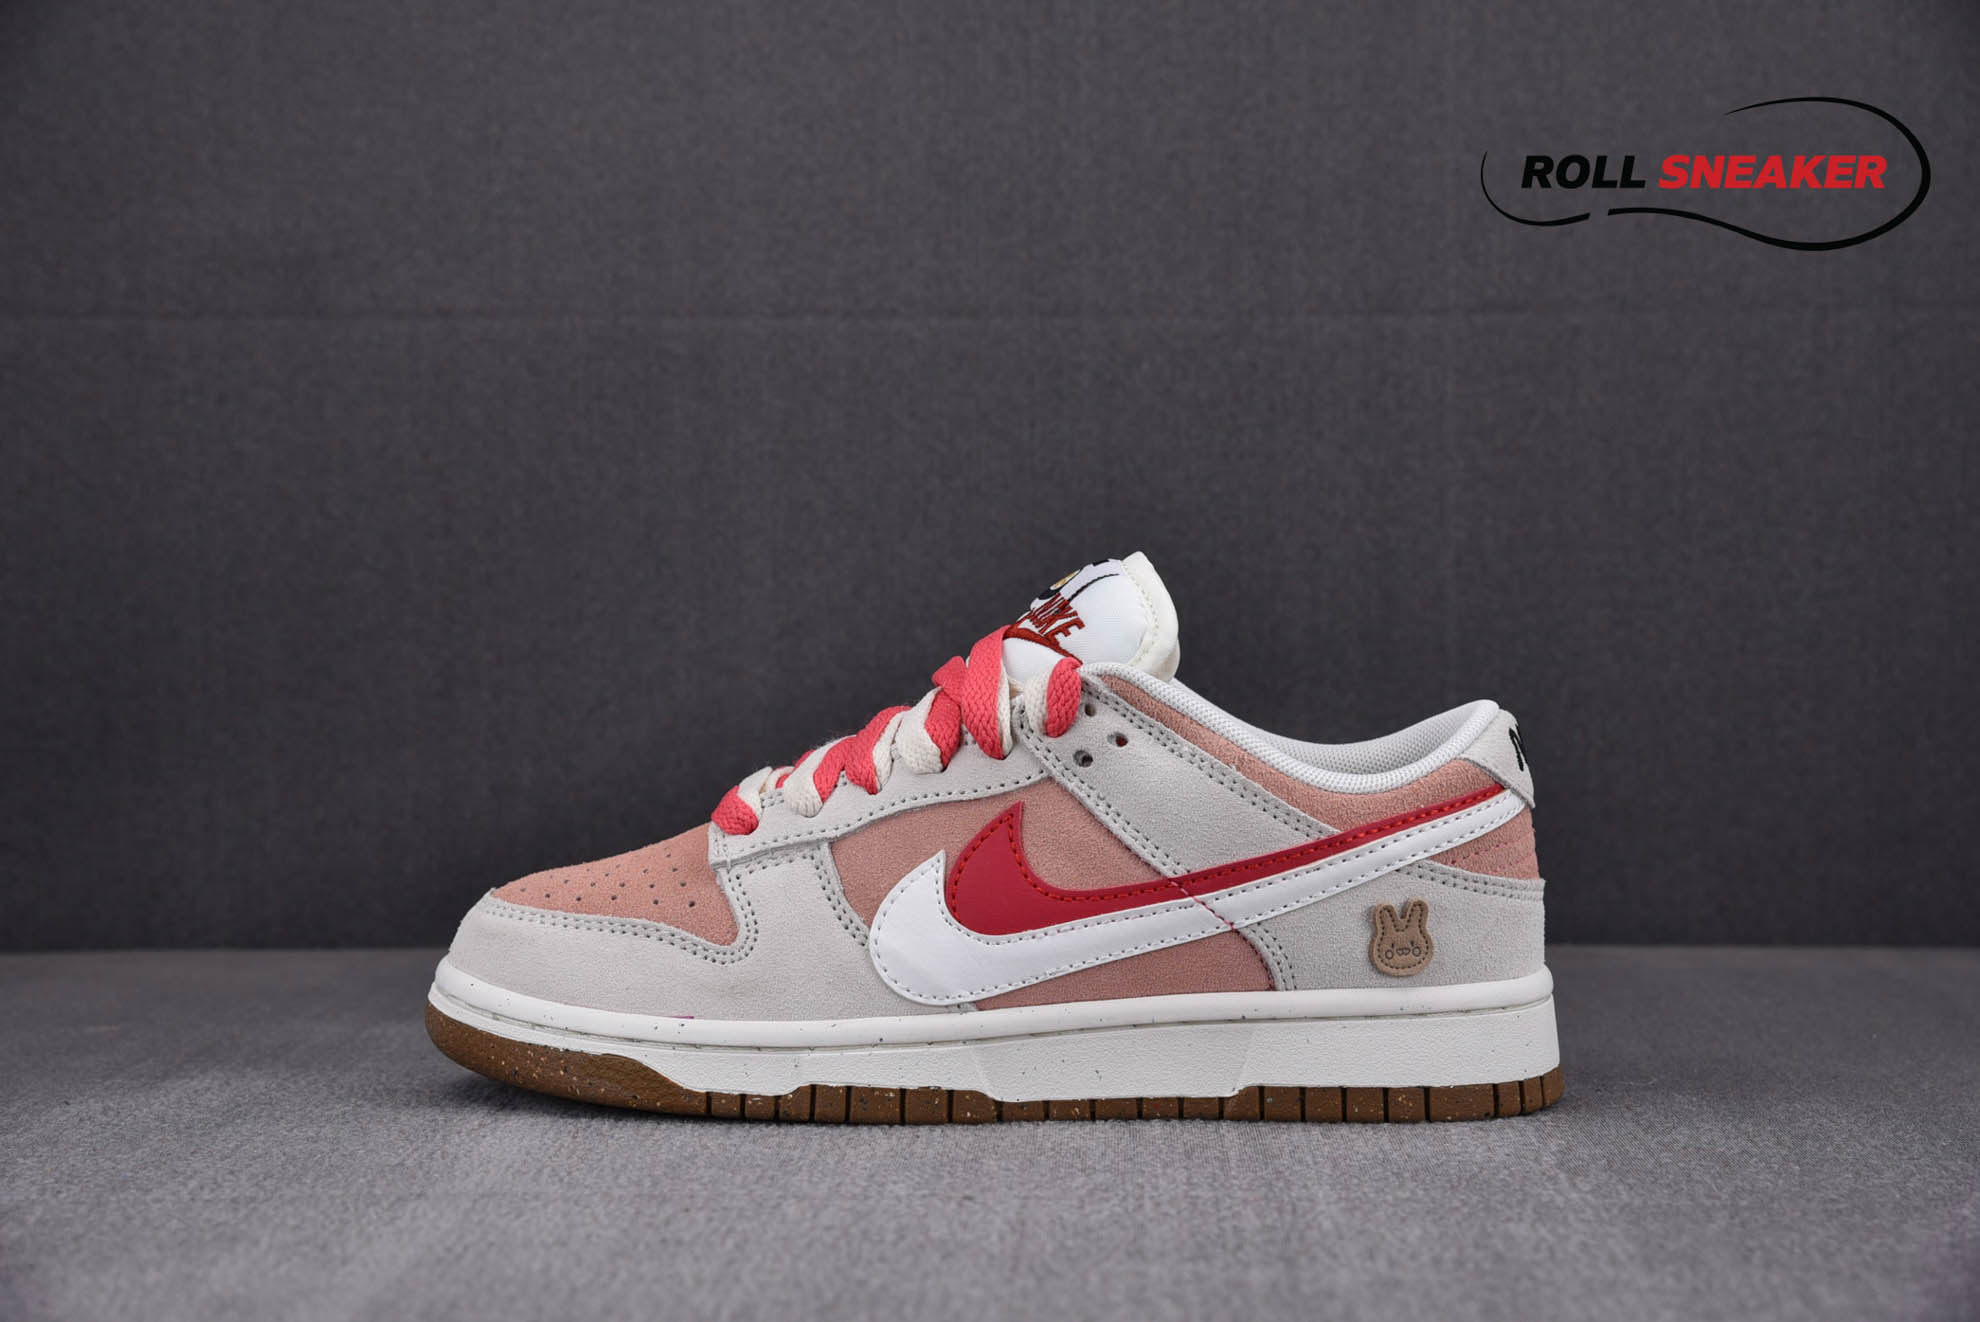 Nike SB Dunk Low Year Of The Rabbit Pink Grey